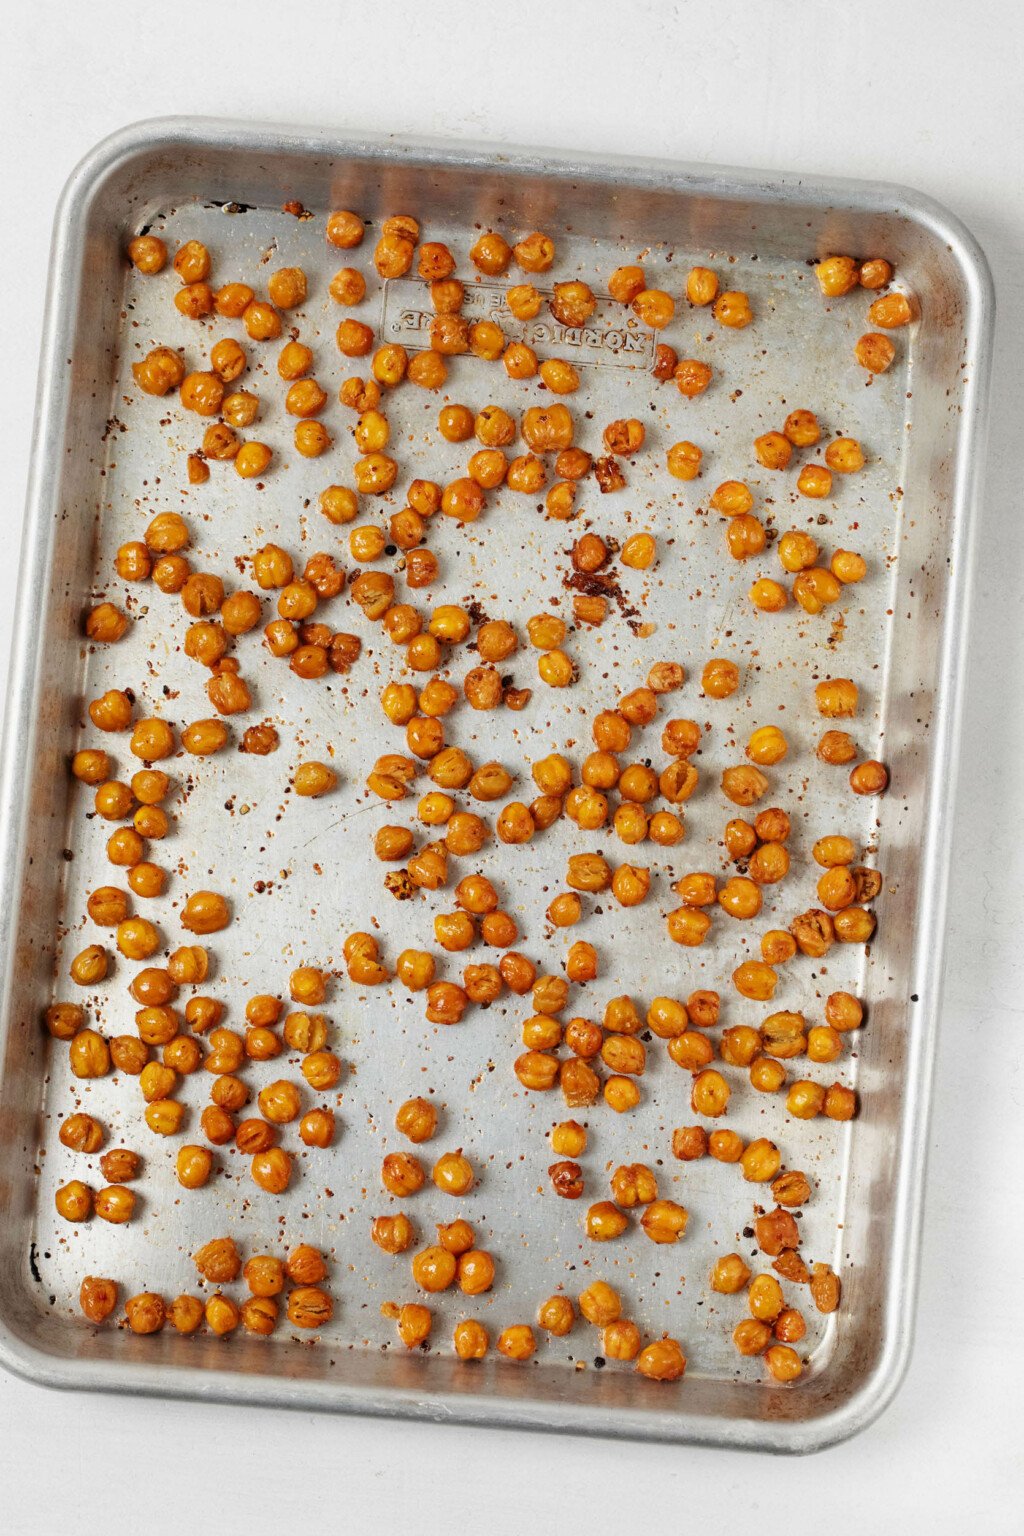 An aluminum baking sheet is covered in crispy roasted chickpeas, which have just been pulled from the oven.